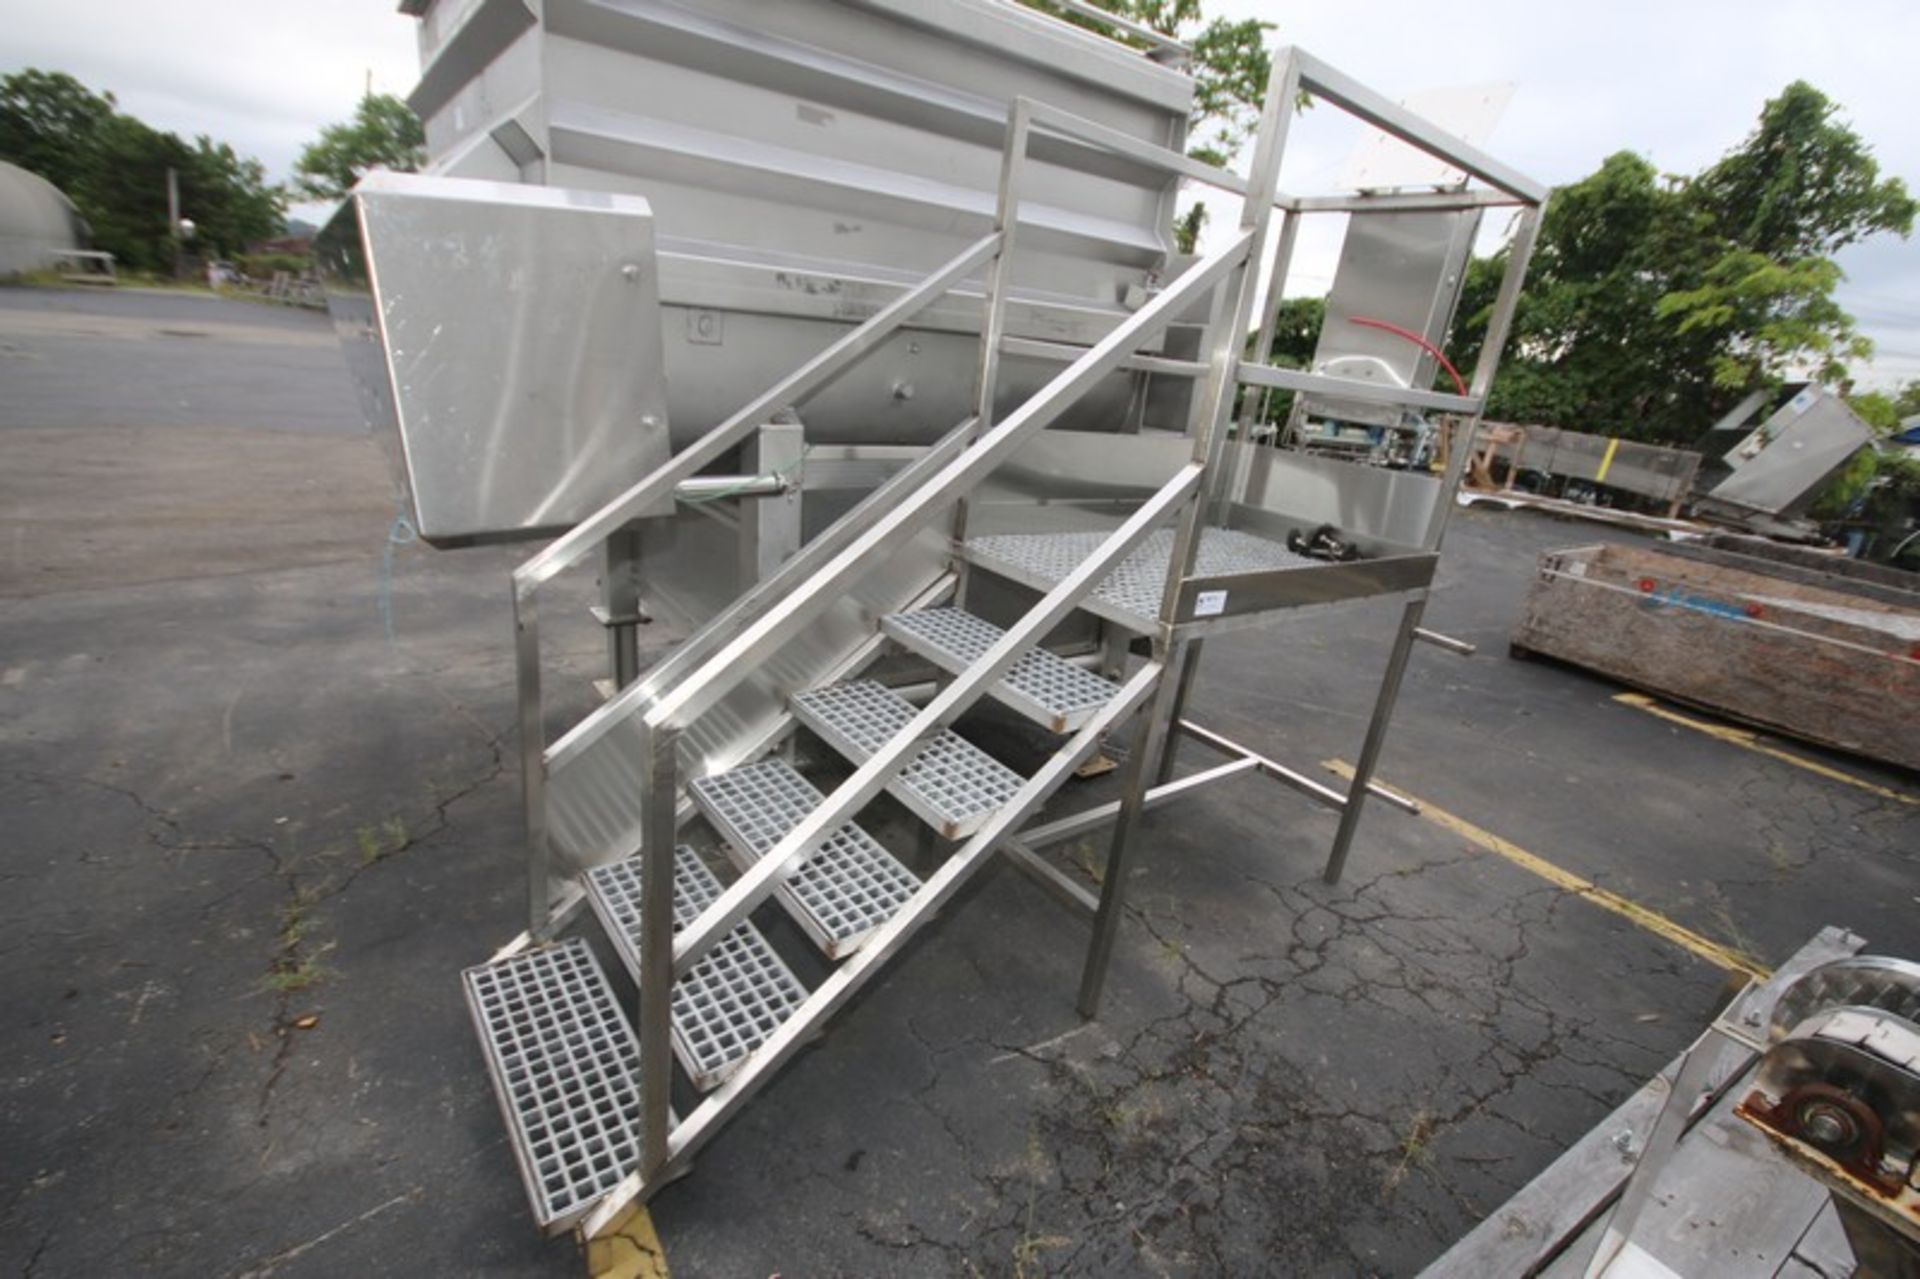 9' L x 30" W x 7' H, S/S Operator's Platform, with Plastic Grating, Handrail, with GE 100 amp Safety